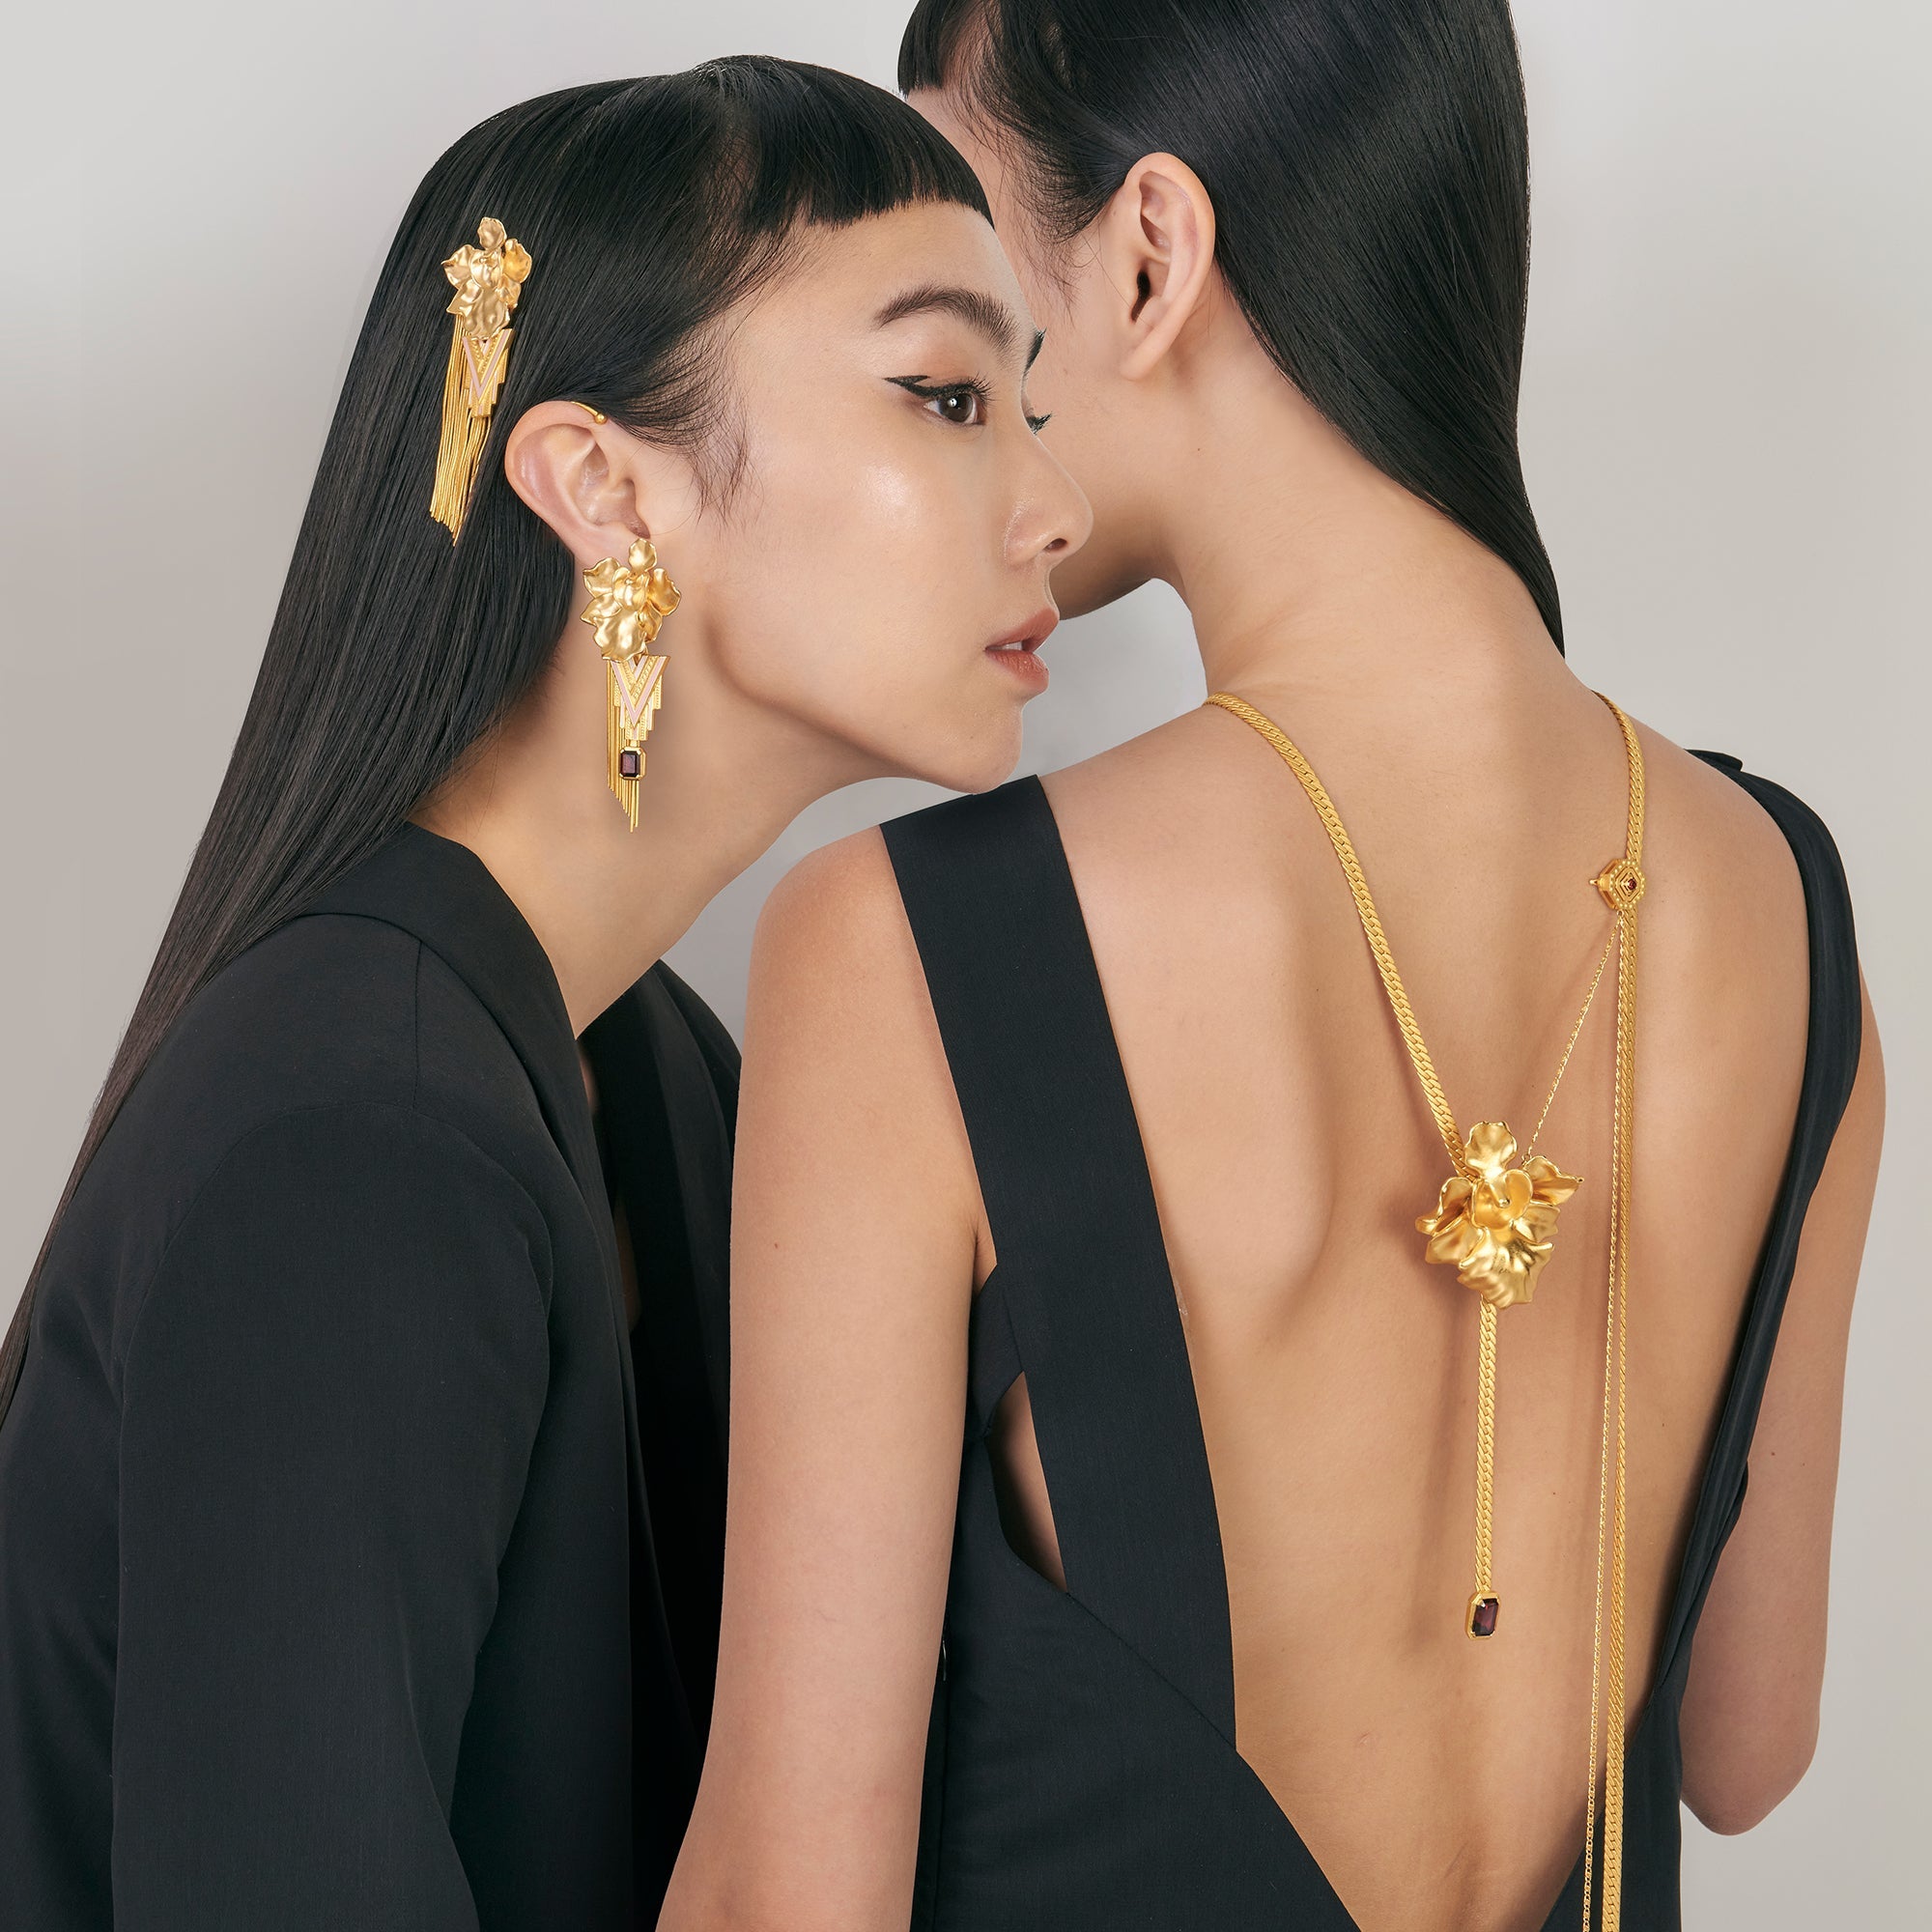 RISIS X STOLEN Iconic Vanda Miss Joaquim Orchid Ear Cuff Collection Shot on Model 